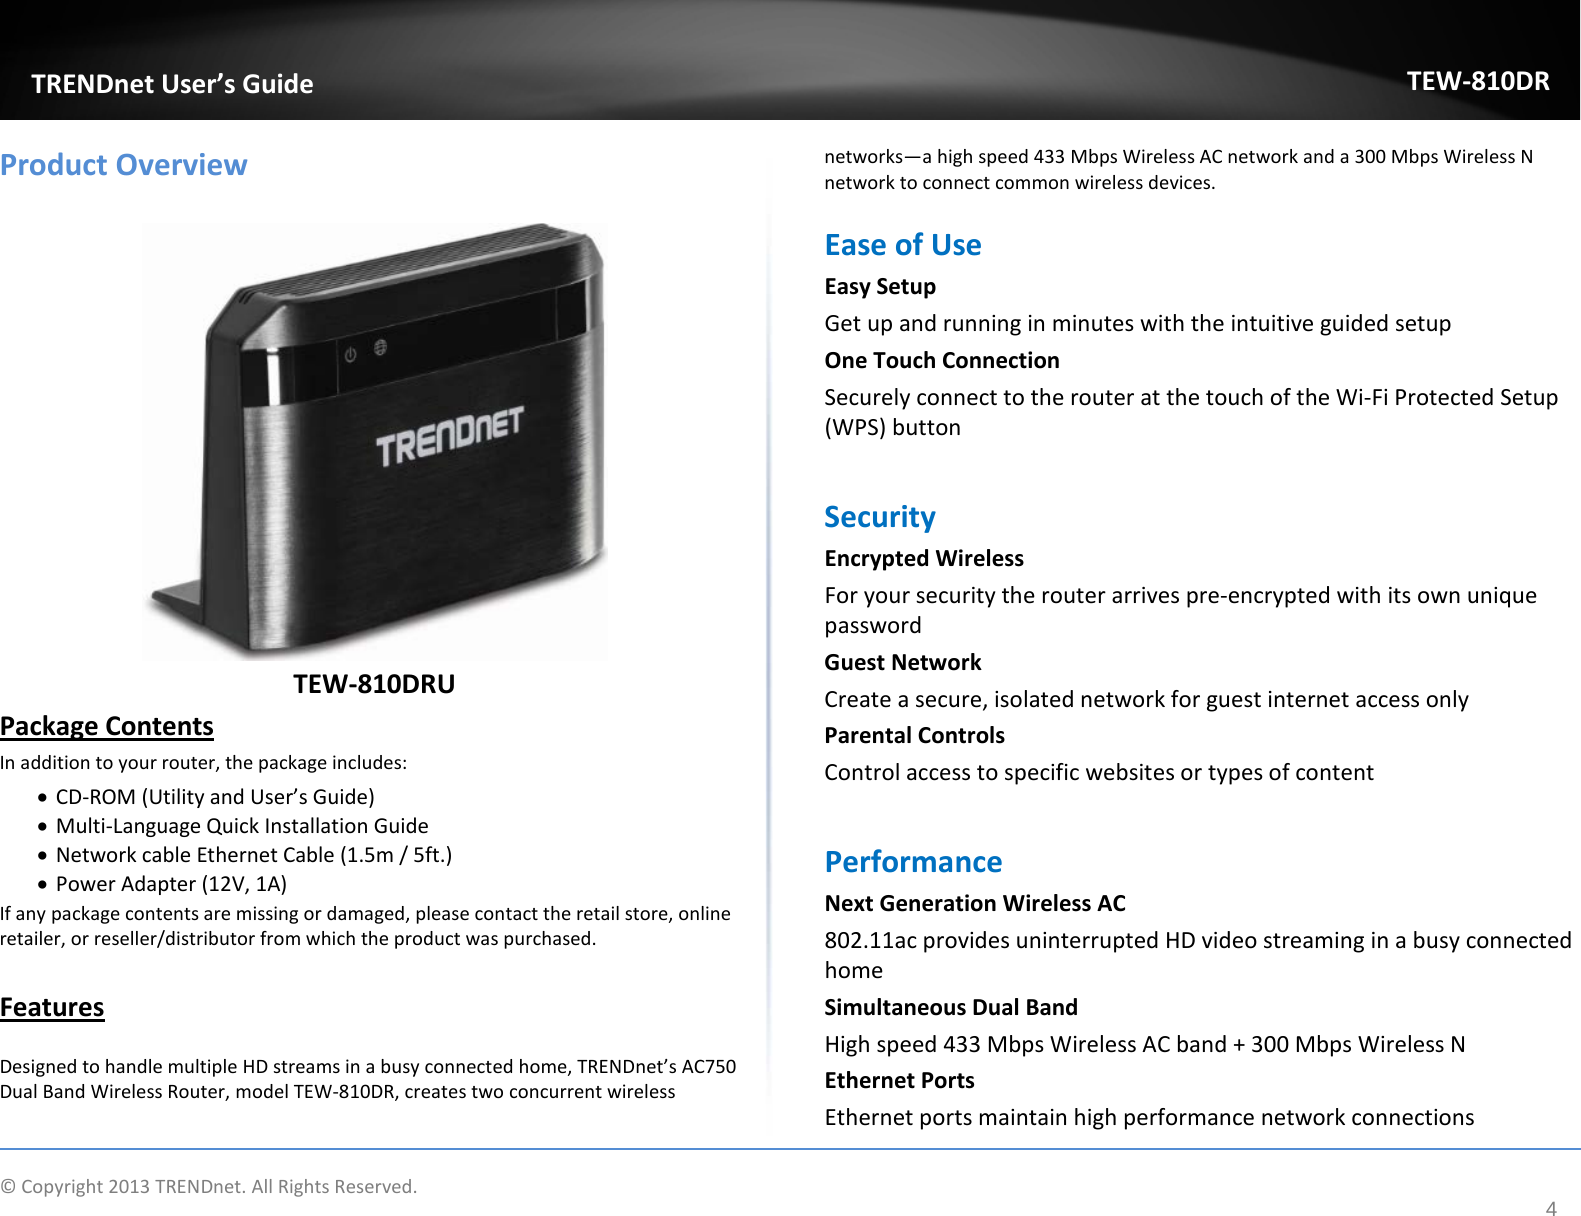             © Copyright 2013 TRENDnet. All Rights Reserved.       TRENDnet User’s Guide TEW-810DR 4 Product Overview   TEW-810DRU Package Contents In addition to your router, the package includes: • CD-ROM (Utility and User’s Guide) • Multi-Language Quick Installation Guide • Network cable Ethernet Cable (1.5m / 5ft.) • Power Adapter (12V, 1A) If any package contents are missing or damaged, please contact the retail store, online retailer, or reseller/distributor from which the product was purchased.  Features  Designed to handle multiple HD streams in a busy connected home, TRENDnet’s AC750 Dual Band Wireless Router, model TEW-810DR, creates two concurrent wireless networks—a high speed 433 Mbps Wireless AC network and a 300 Mbps Wireless N network to connect common wireless devices.  Ease of Use  Easy Setup Get up and running in minutes with the intuitive guided setup One Touch Connection Securely connect to the router at the touch of the Wi-Fi Protected Setup (WPS) button  Security  Encrypted Wireless For your security the router arrives pre-encrypted with its own unique password Guest Network  Create a secure, isolated network for guest internet access only Parental Controls Control access to specific websites or types of content  Performance Next Generation Wireless AC 802.11ac provides uninterrupted HD video streaming in a busy connected home  Simultaneous Dual Band High speed 433 Mbps Wireless AC band + 300 Mbps Wireless N Ethernet Ports  Ethernet ports maintain high performance network connections 